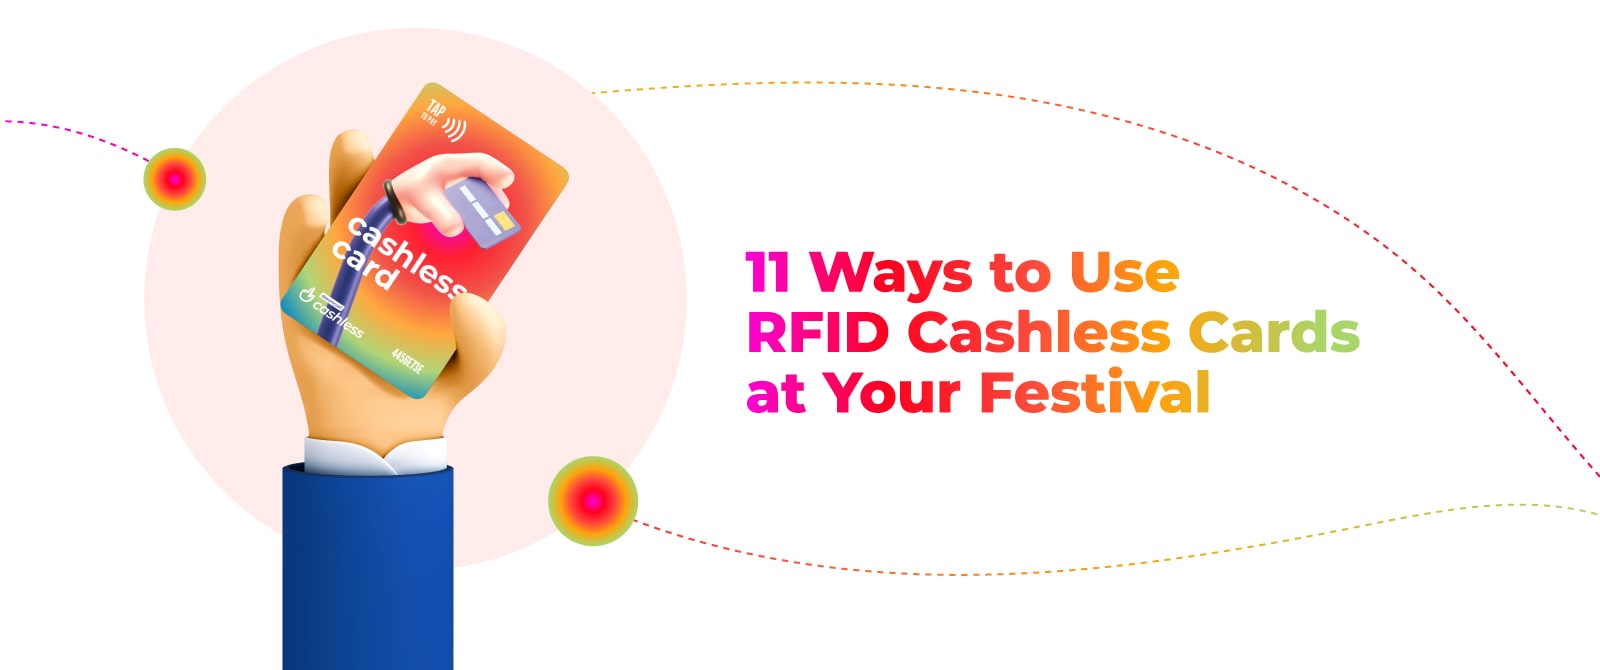 11 Ways to Use RFID Cashless Cards at Your Festival